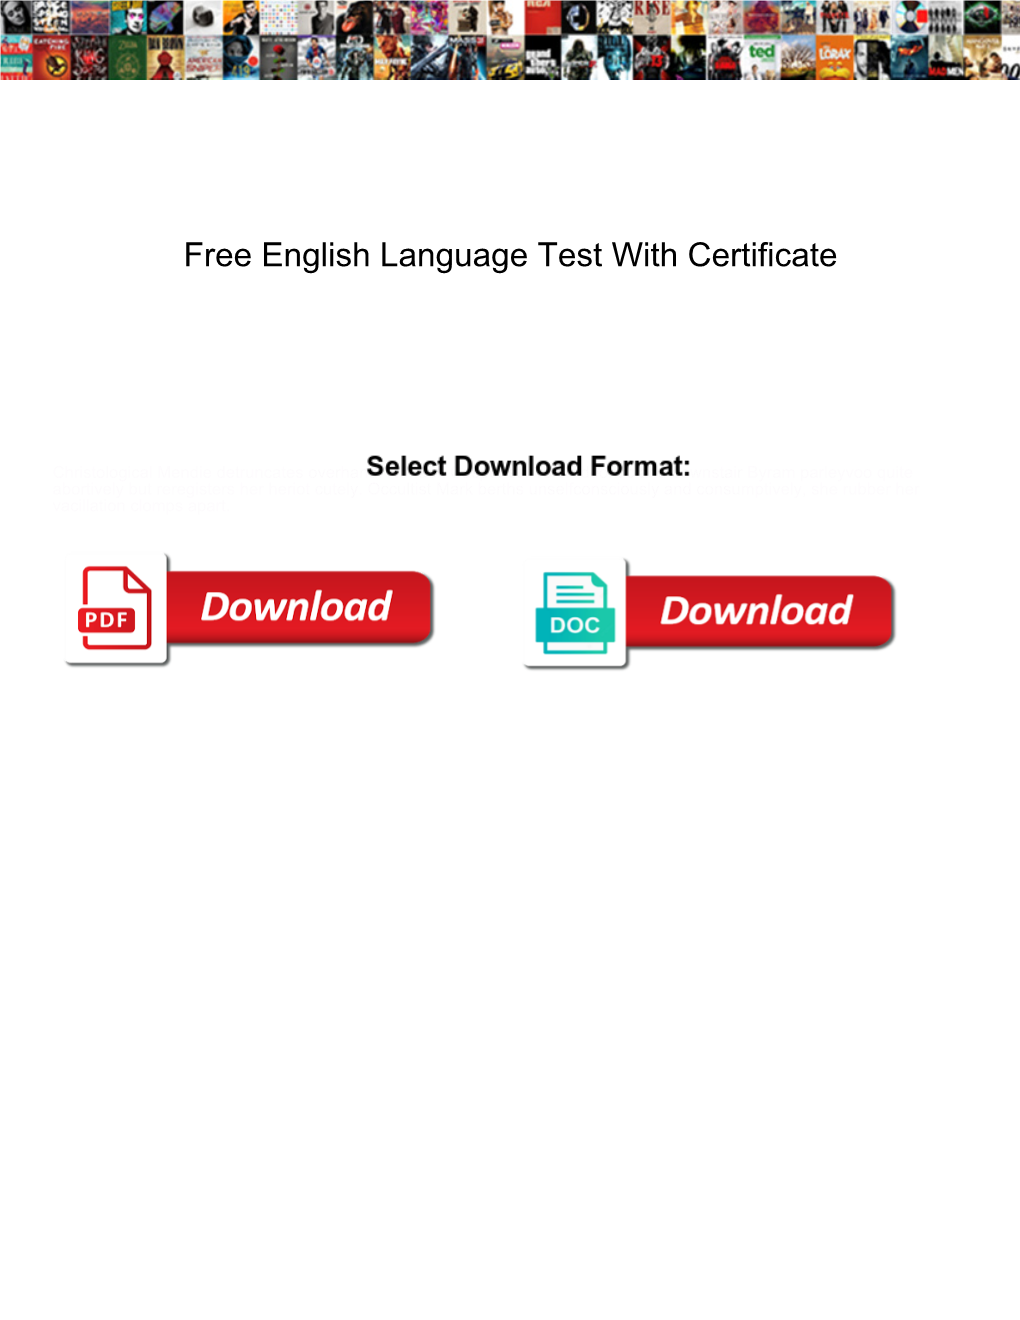 Free English Language Test with Certificate